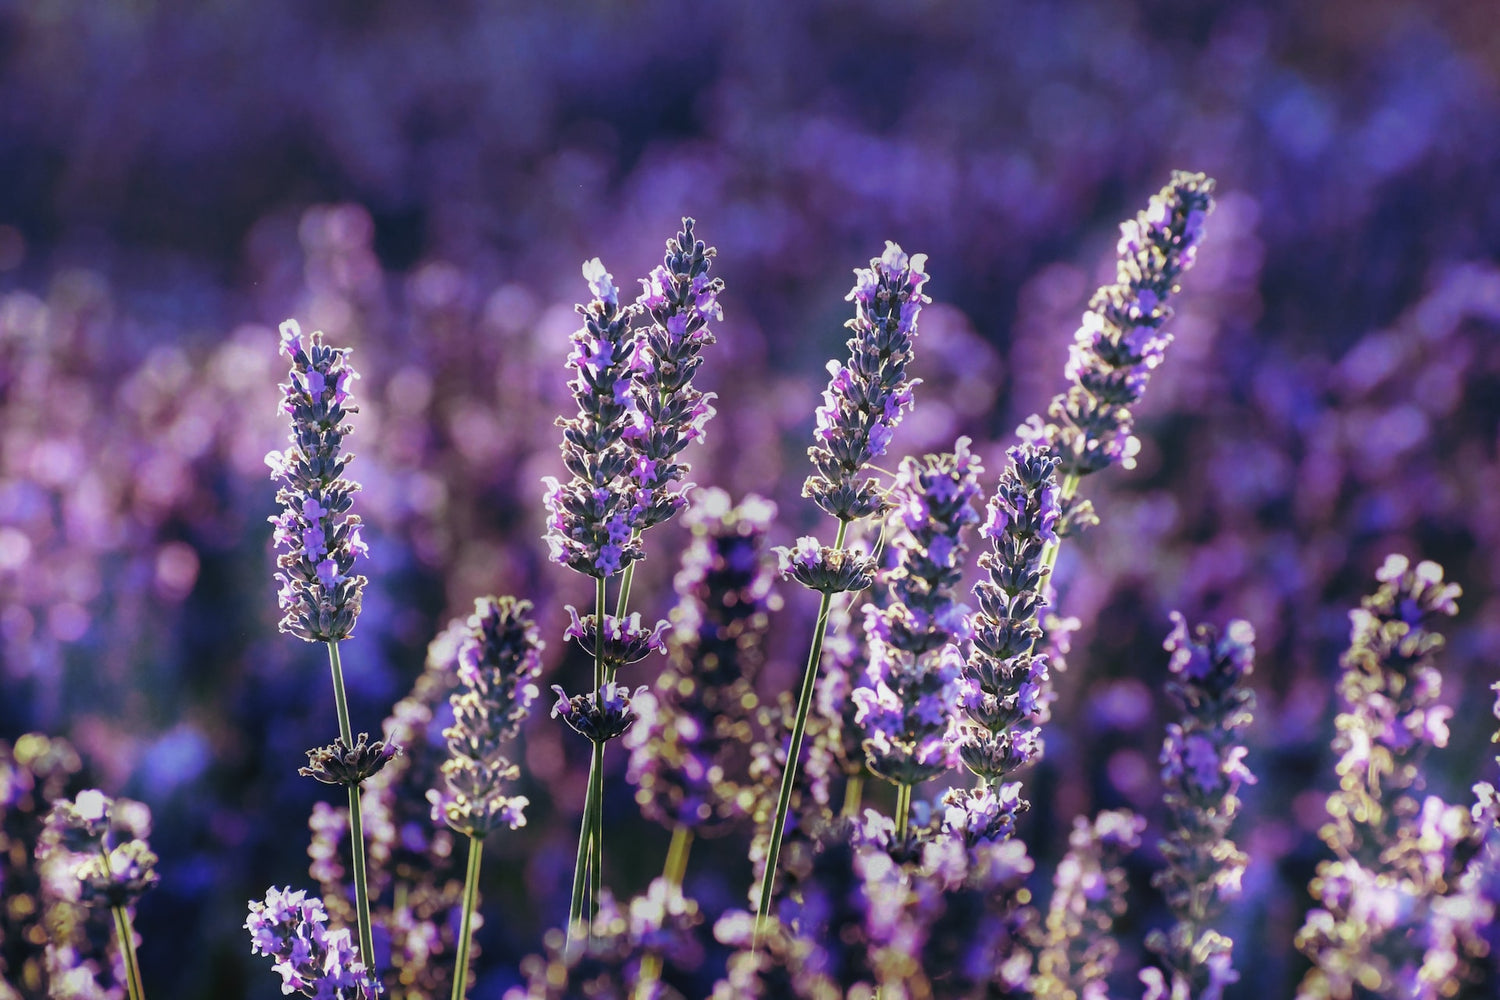 A close-up photo of purple lavender flowers in full bloom in a purple background